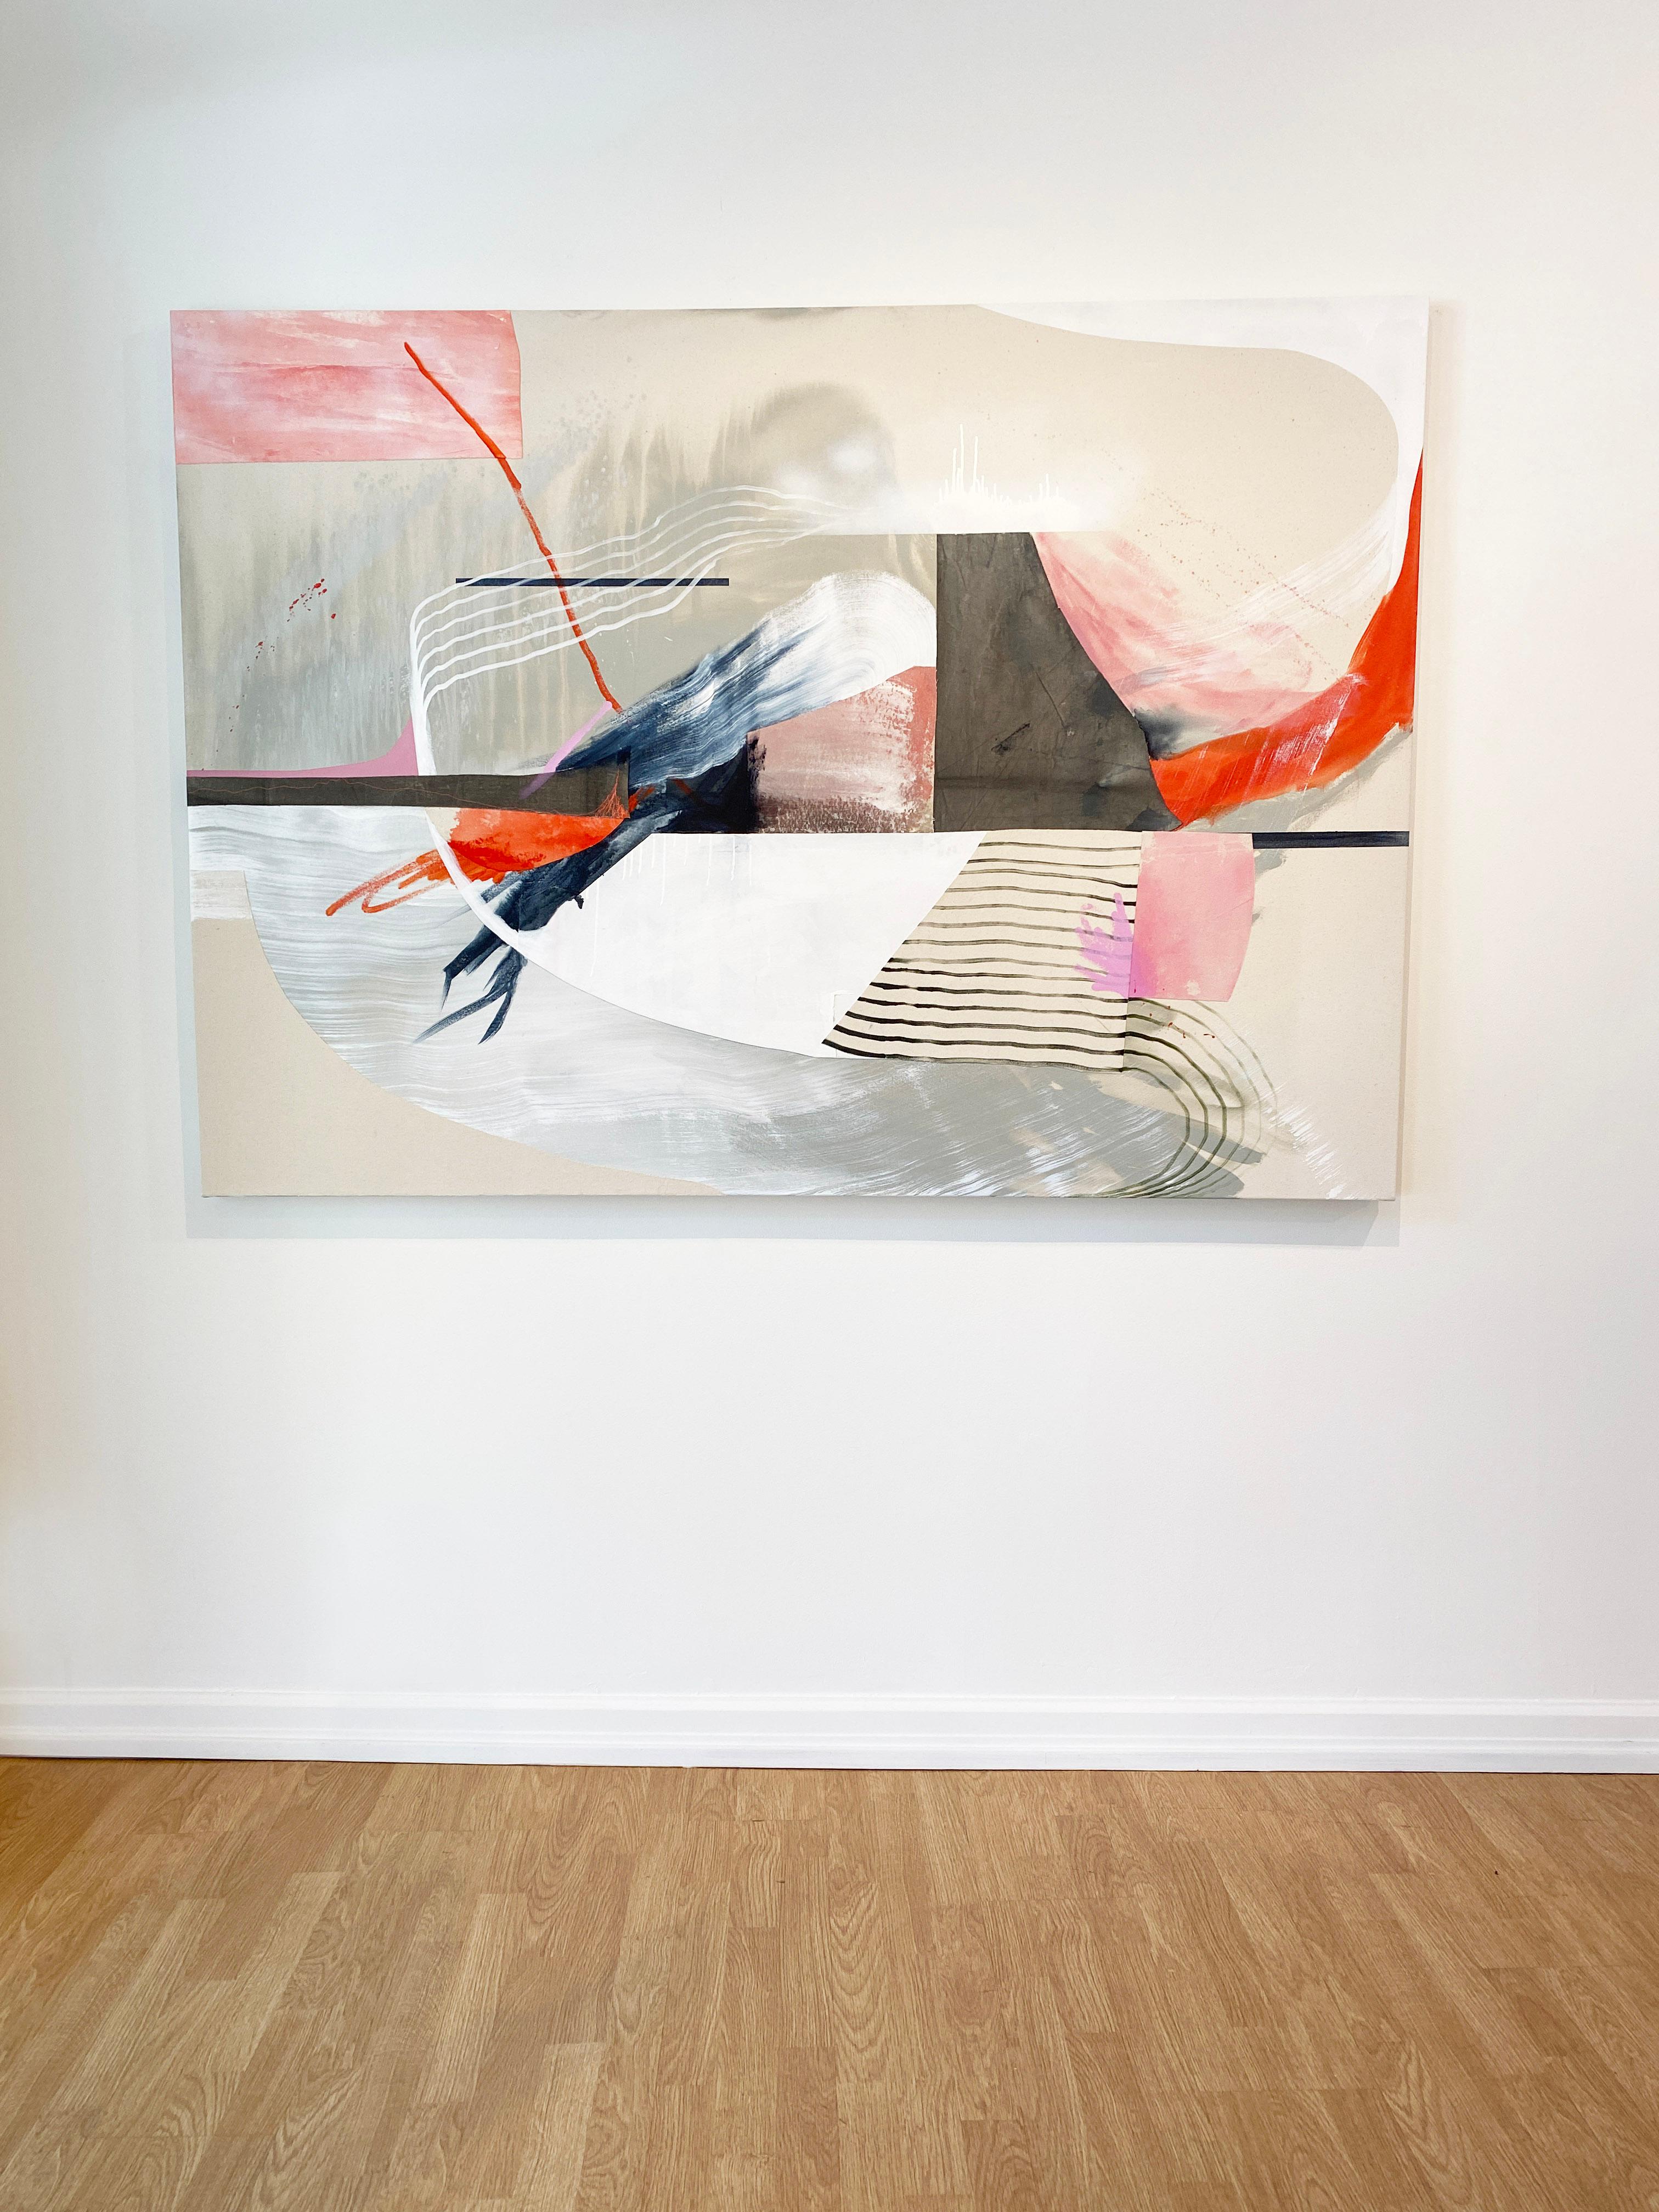 'Trailing Traces' 2022 by Contemporary American artist, Rebecca Stern. Acrylic, ink, spray paint, embroidery, and canvas collage on canvas , 50 x 70 in. This painting incorporates mostly a soft palette of colors in red, orange, pink, beige, grey,